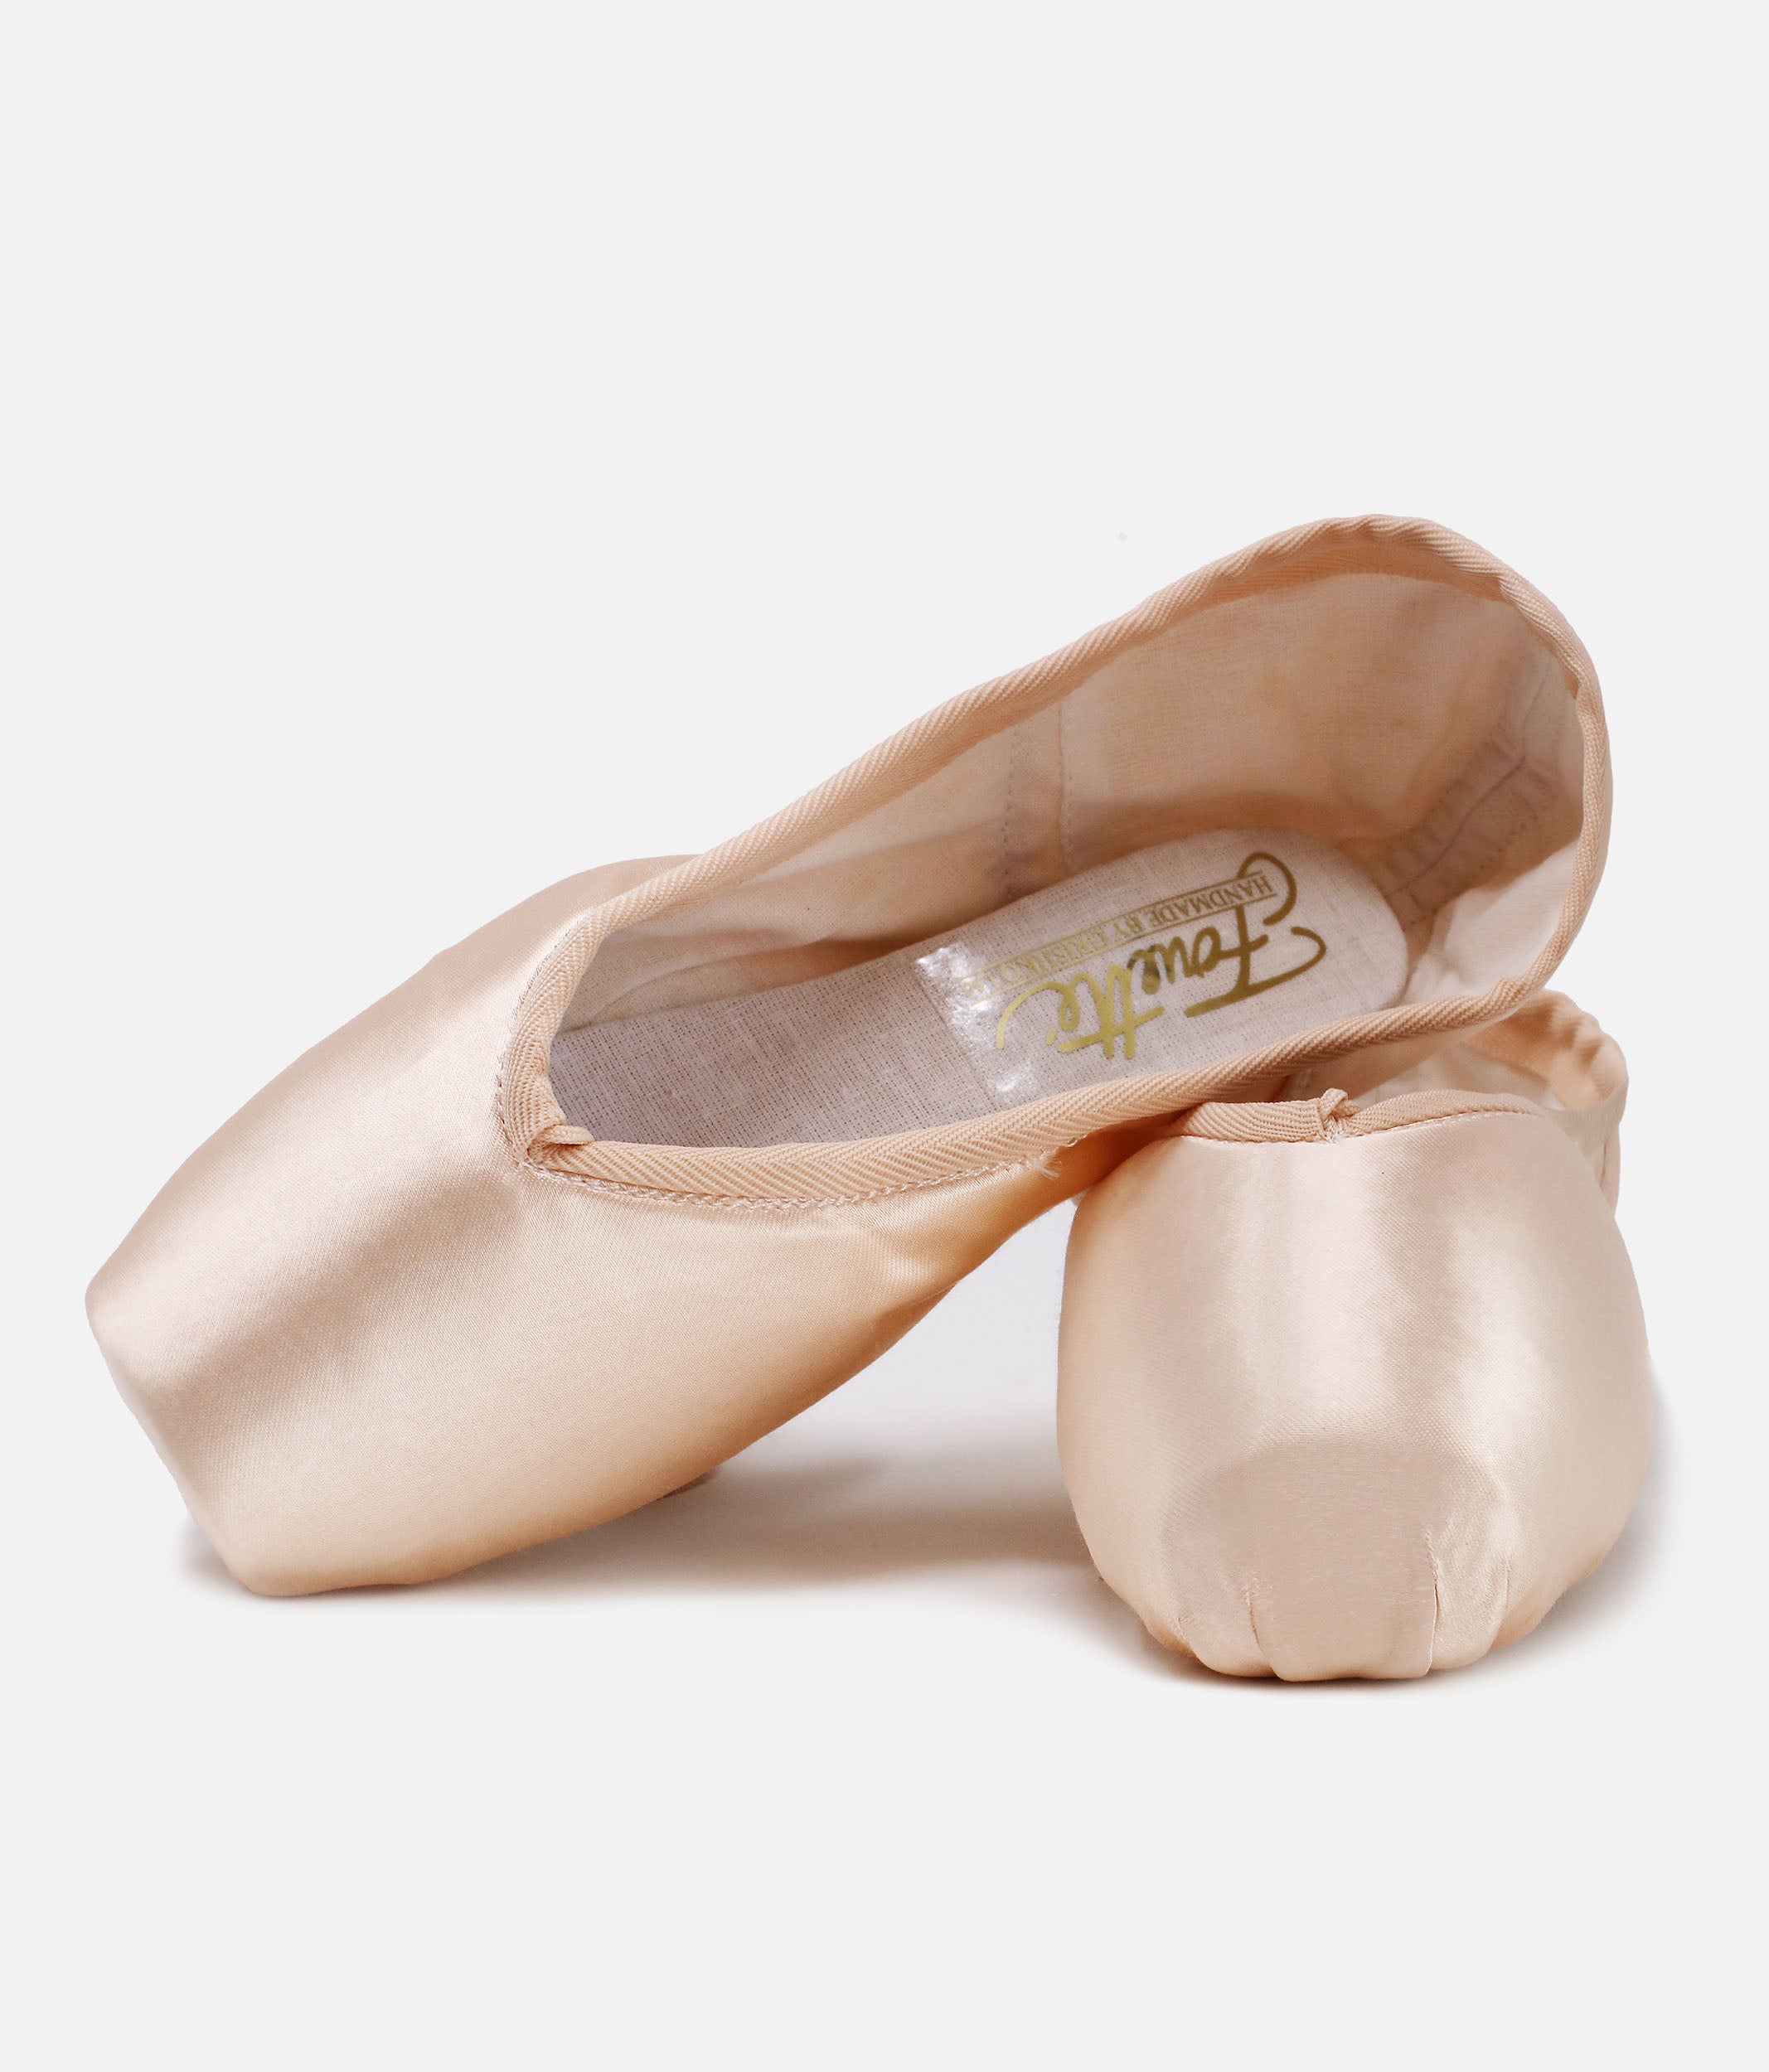 Pointes Fouette - Fouette